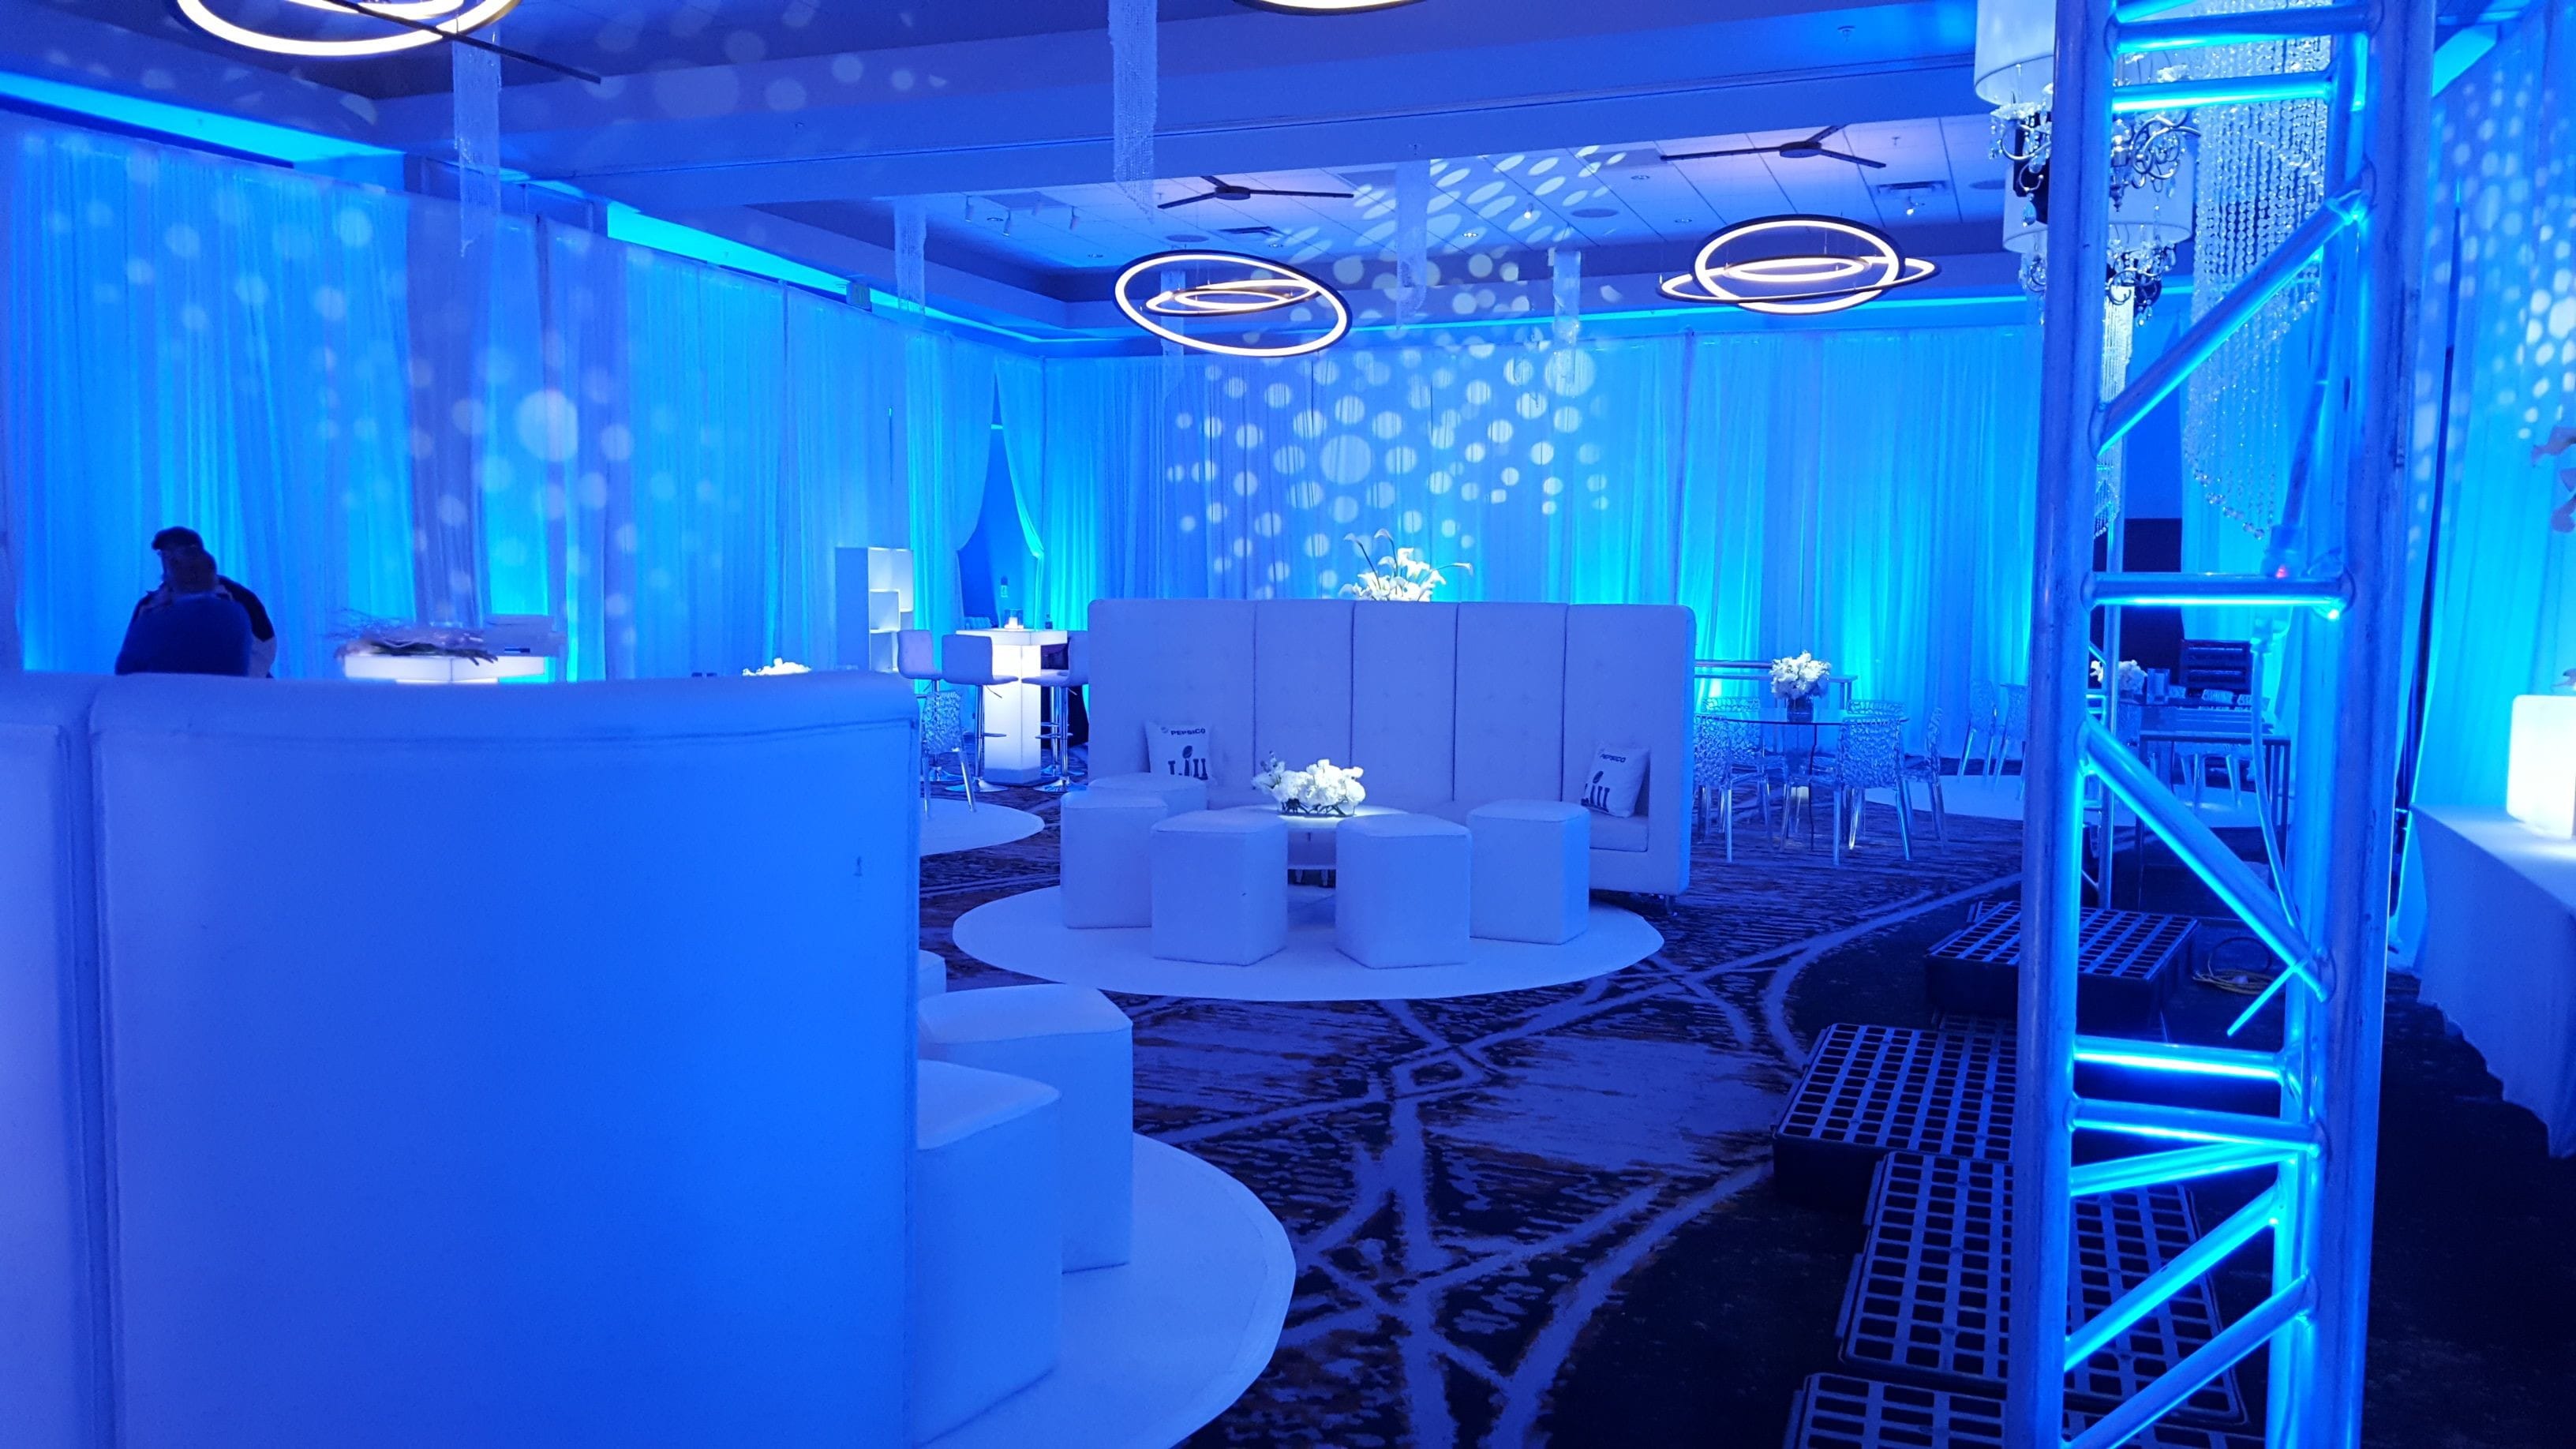 Blue up lighting with glowing cocktail tables, pin spots and gobos for a pre Super Bowl party at the Minneapolis Renaissance Depot Hotel.